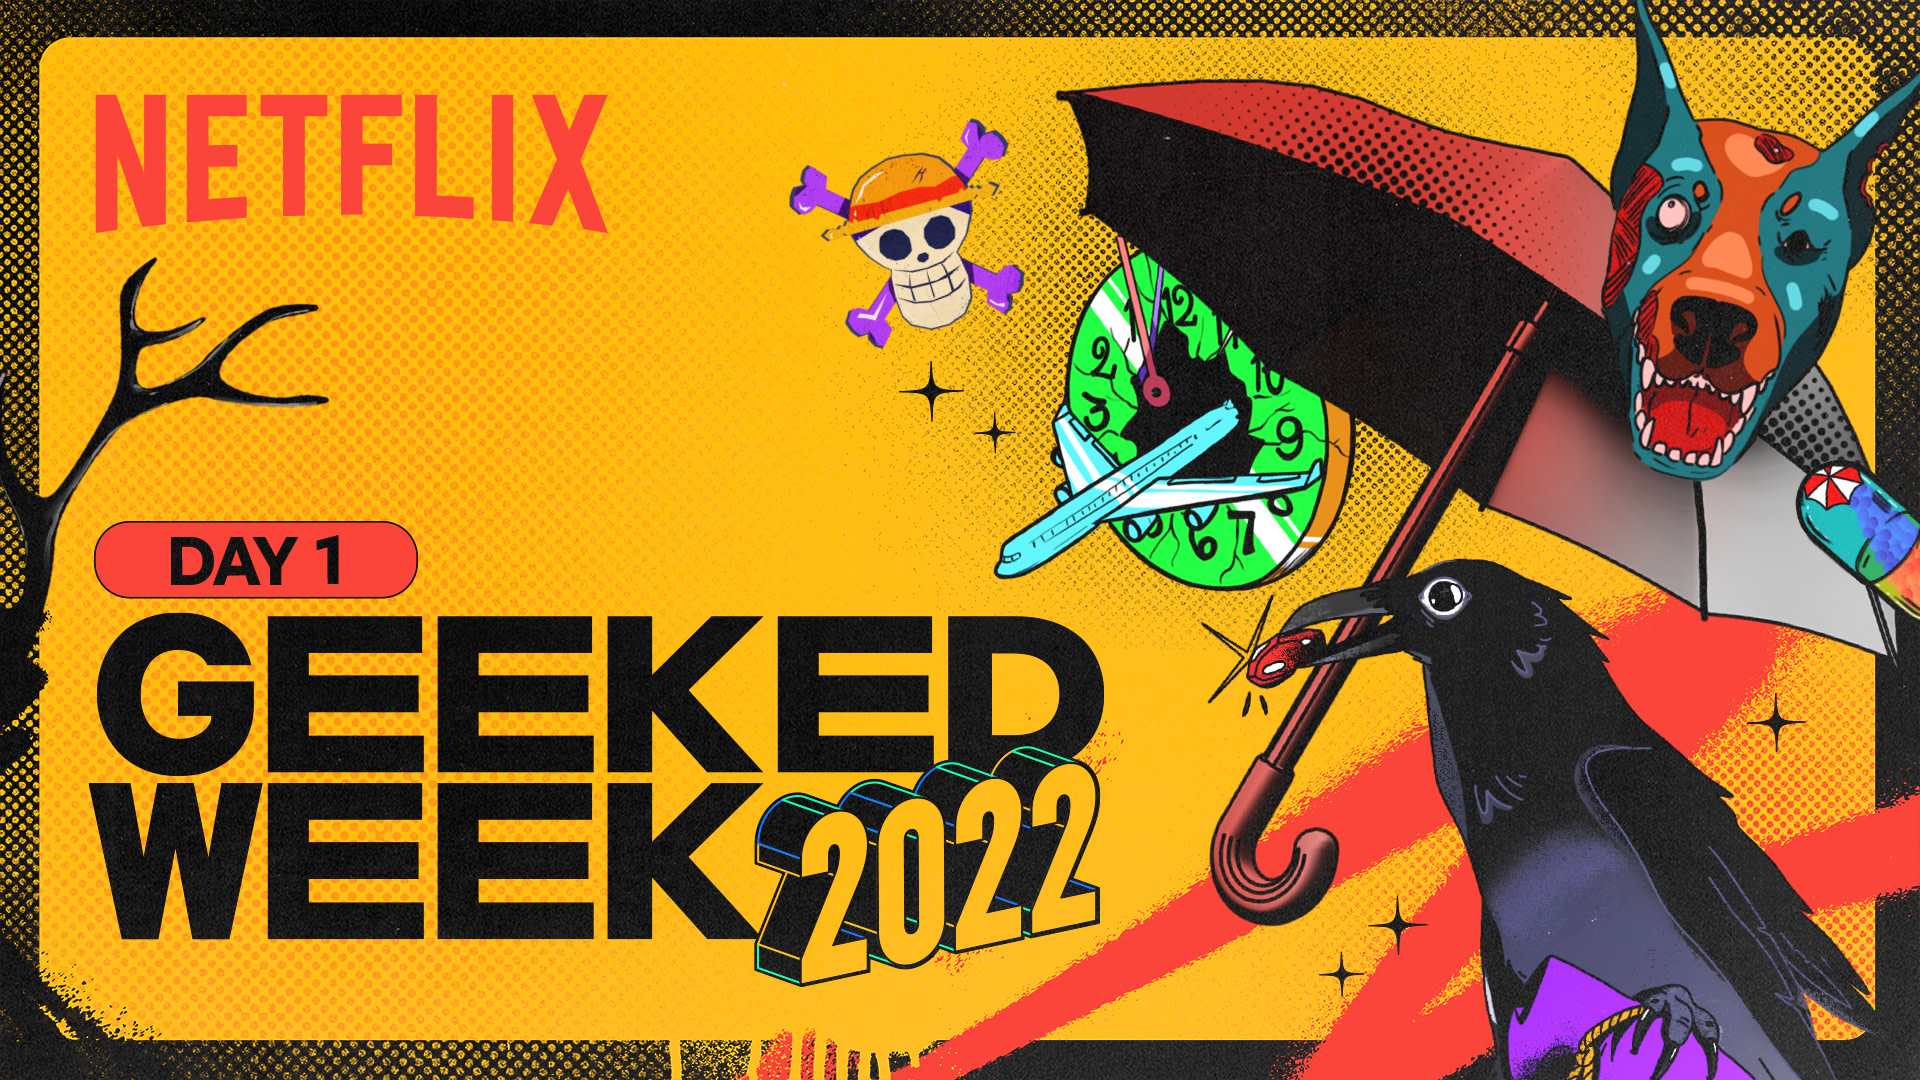 Geeked Week 2022 Recap: All the News and Sneak Peeks From Animation Day -  About Netflix